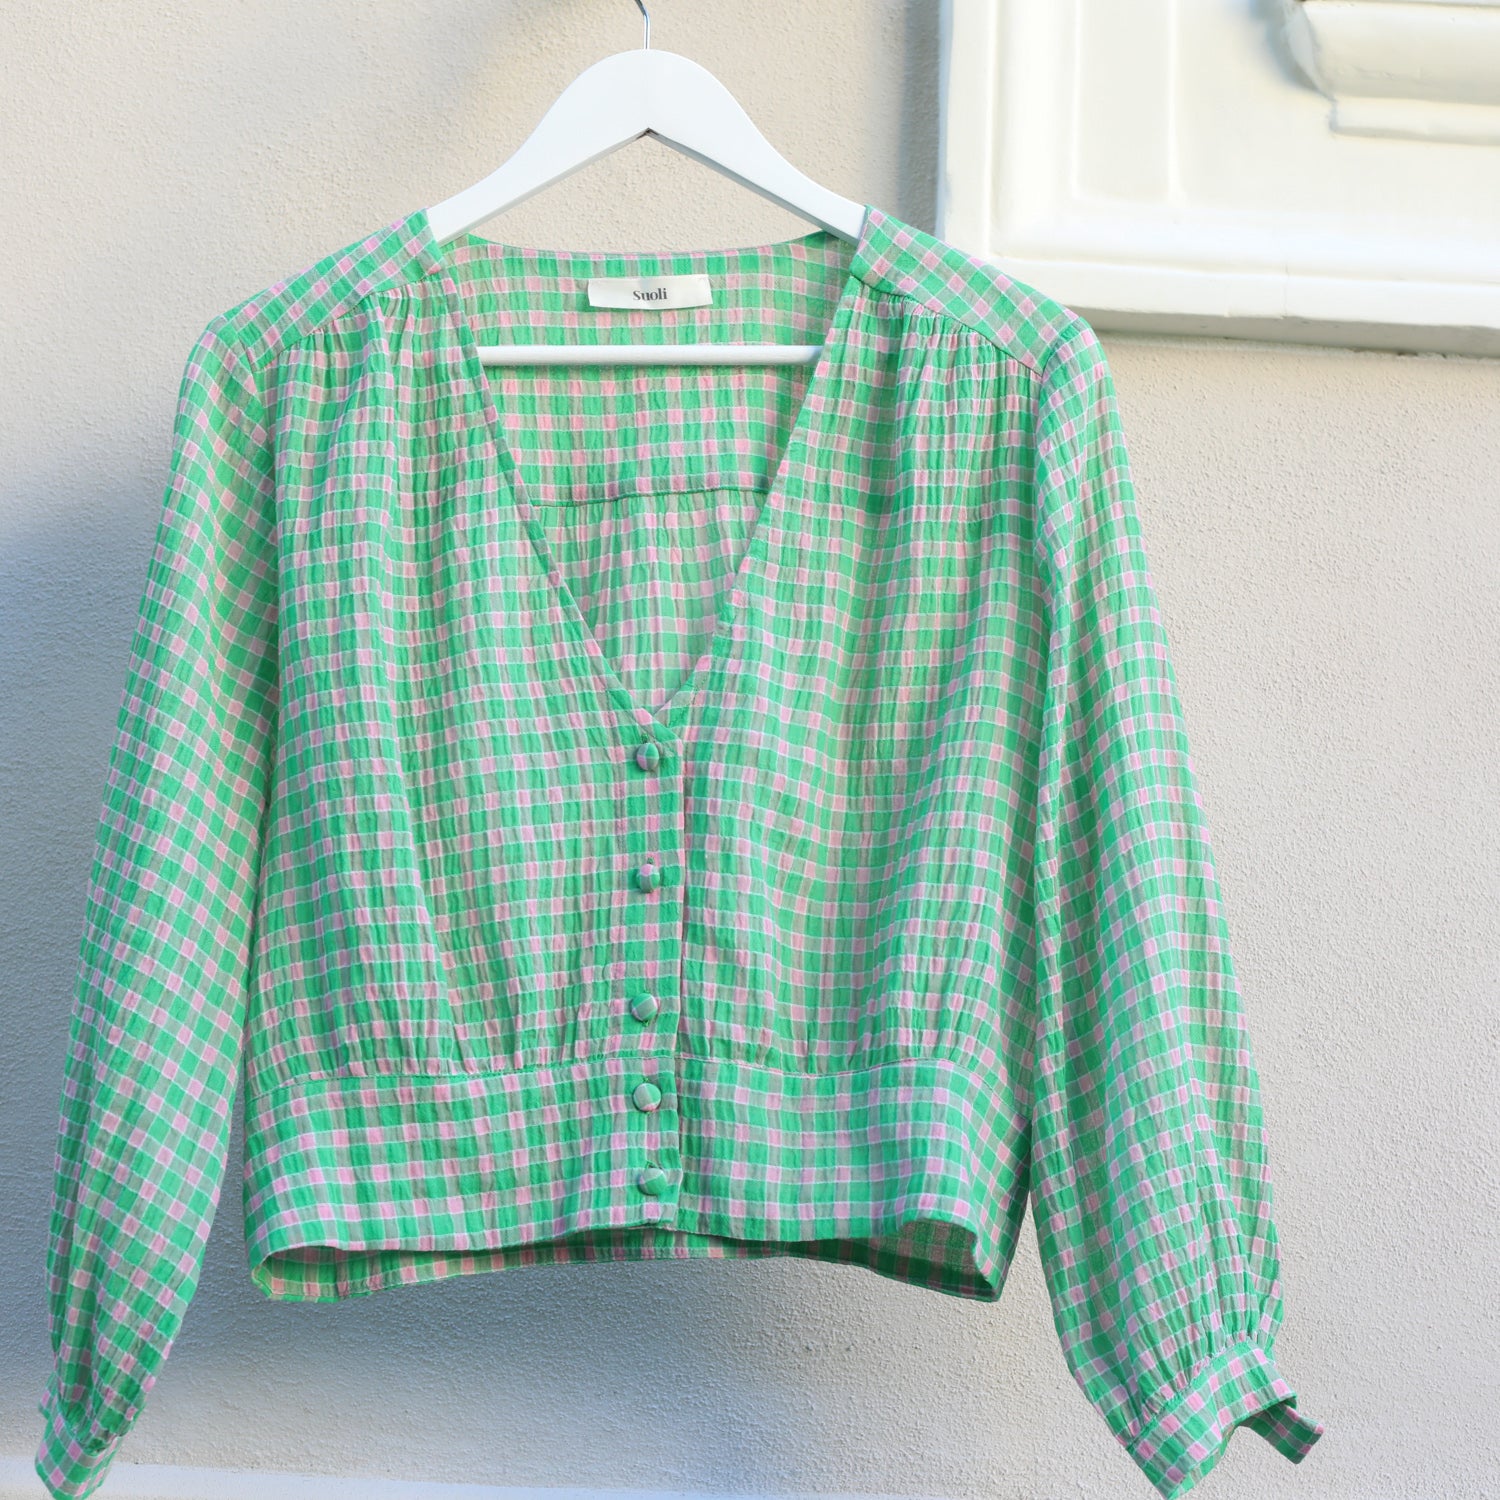 Suoli Cheesecloth Gingham Blouse